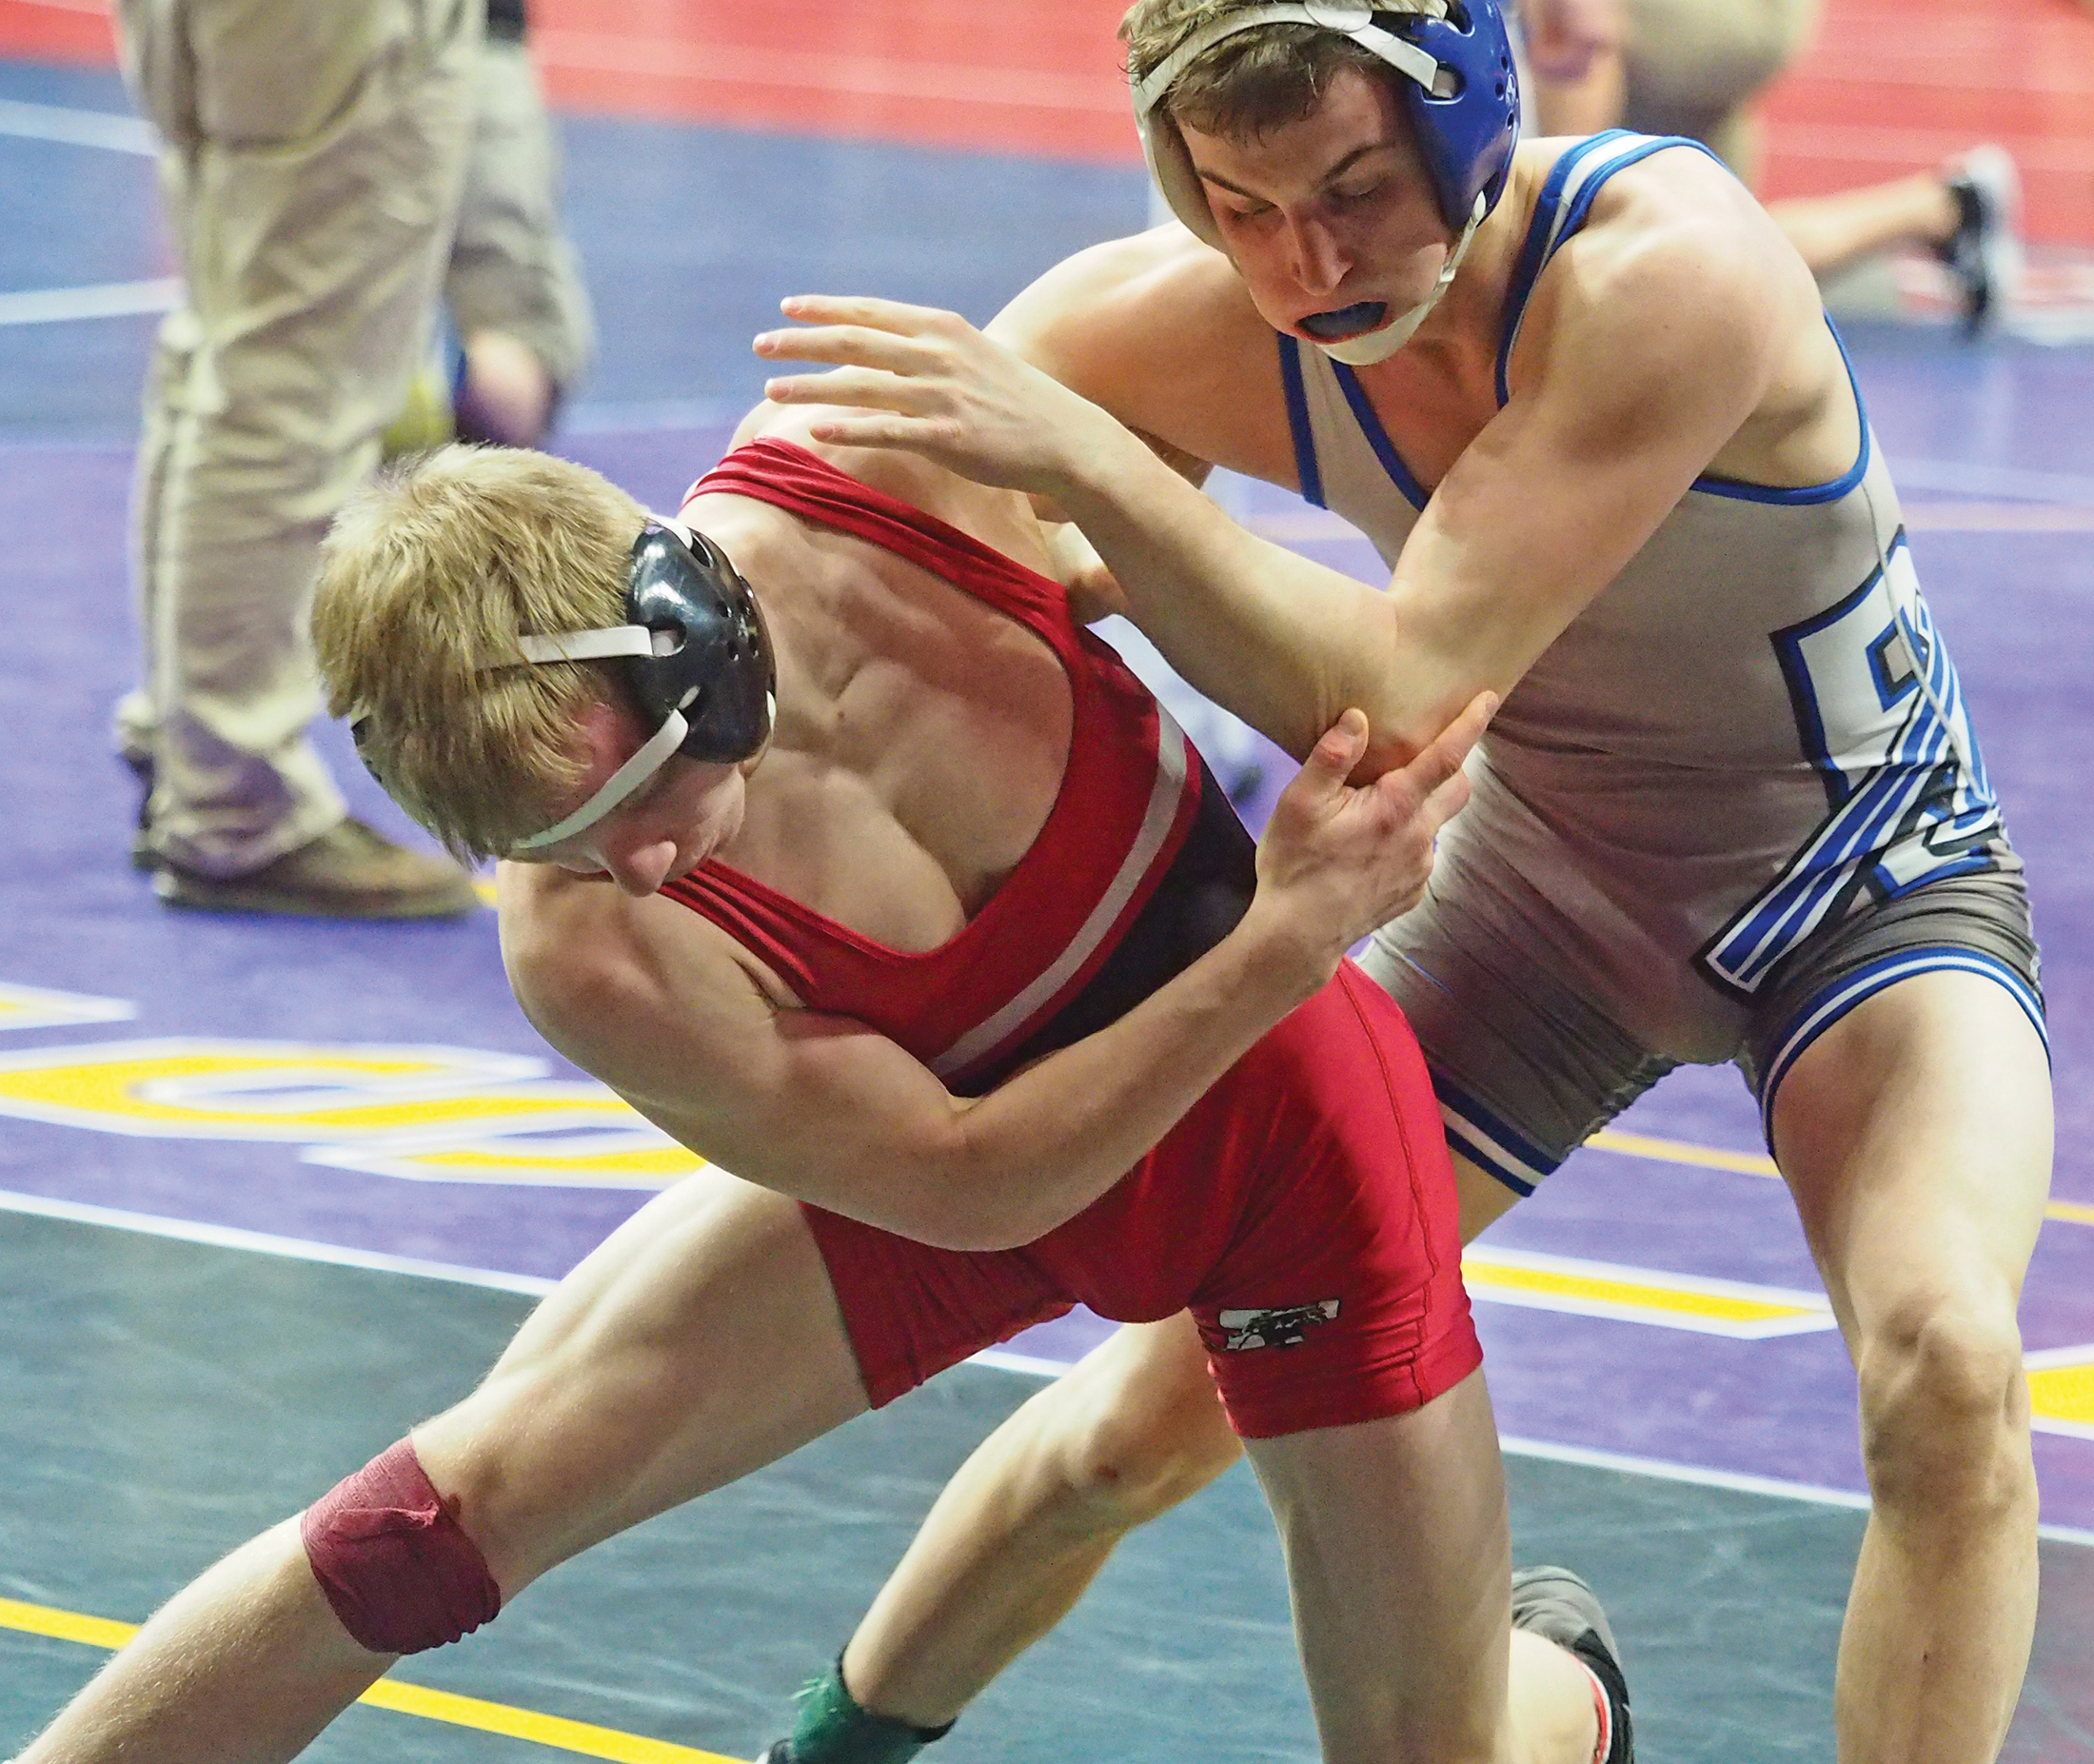 Rockford’s Portis 4th, Vance 8th at State Wrestling Championships